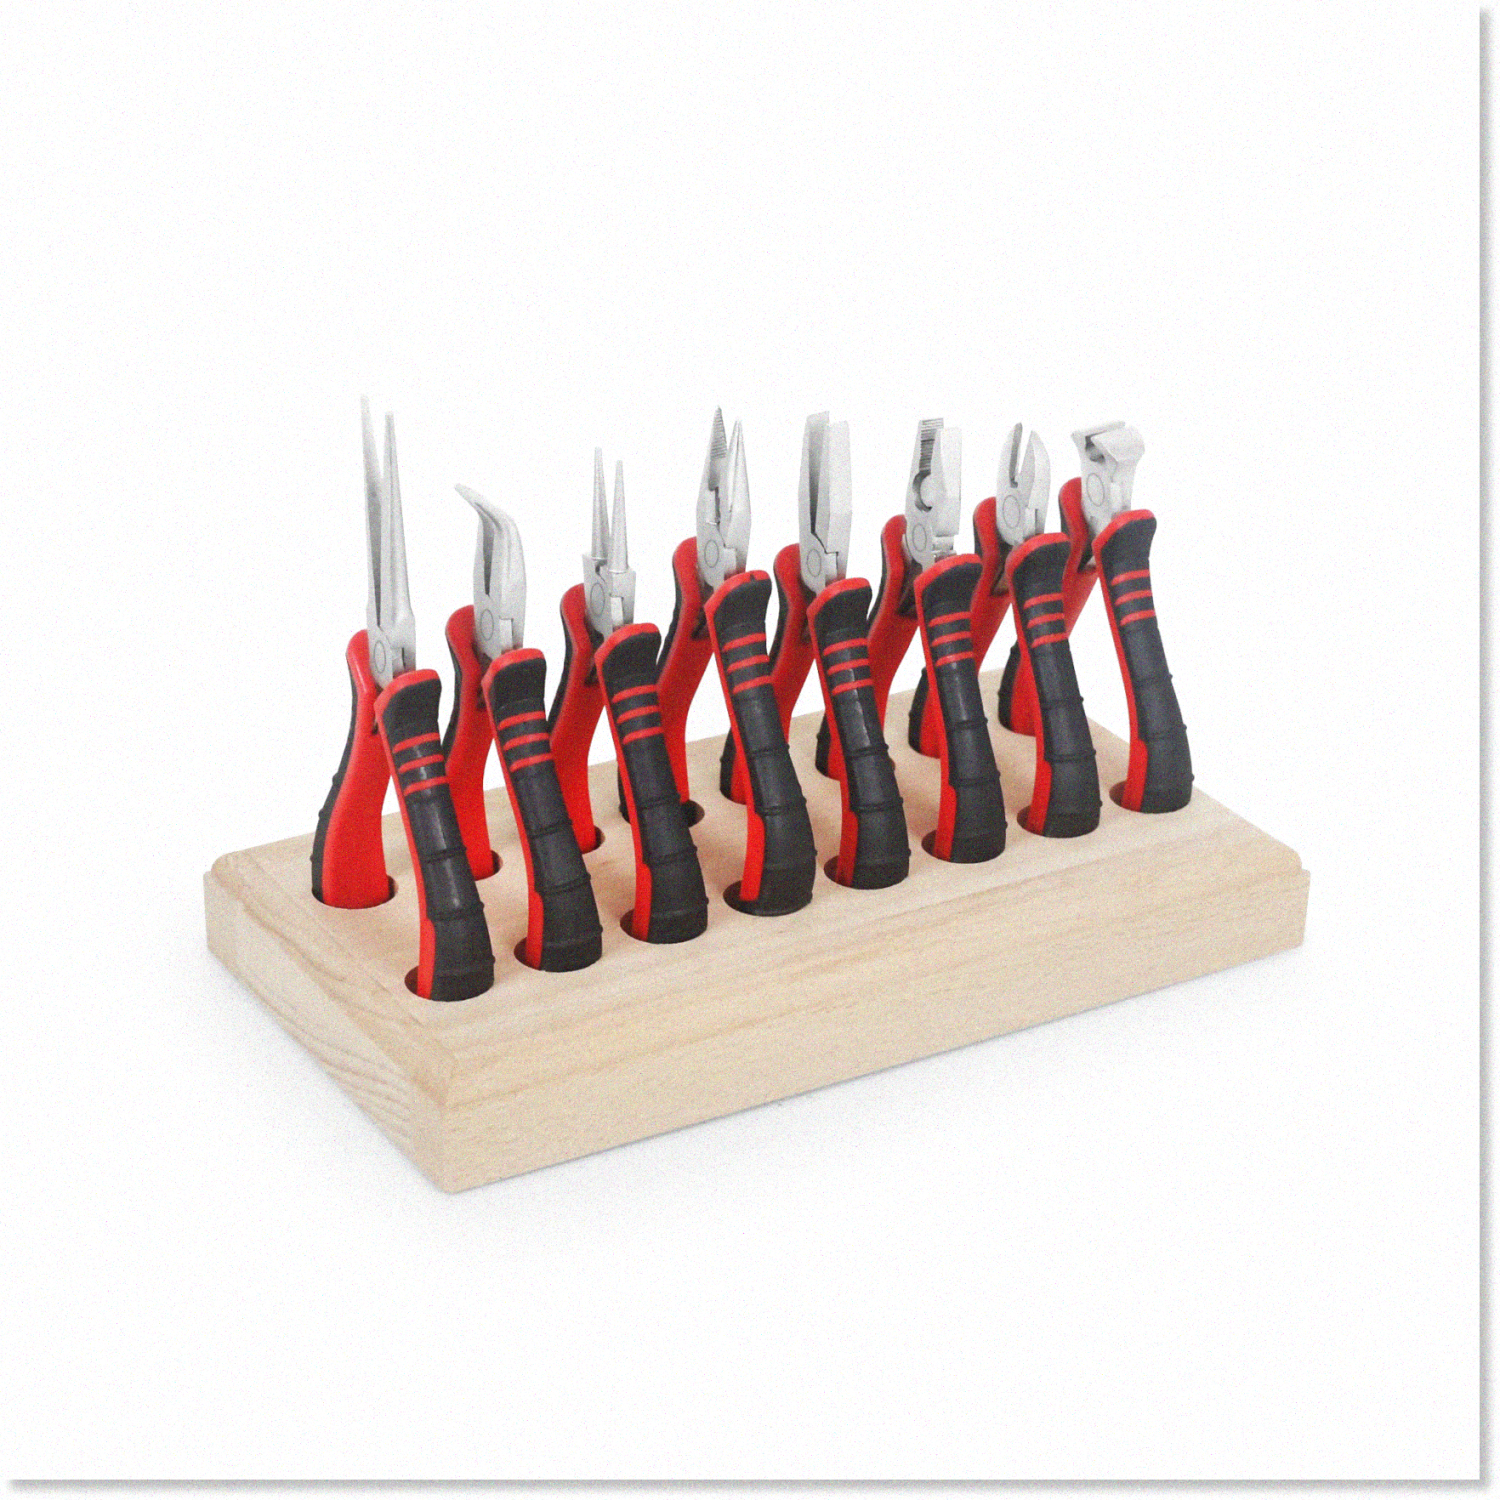 8PCS Premium Jewelry Pliers Set with Wood Pallet - High-Quality Tools for Jewelry Making, Repair, Wire Wrapping, Beading